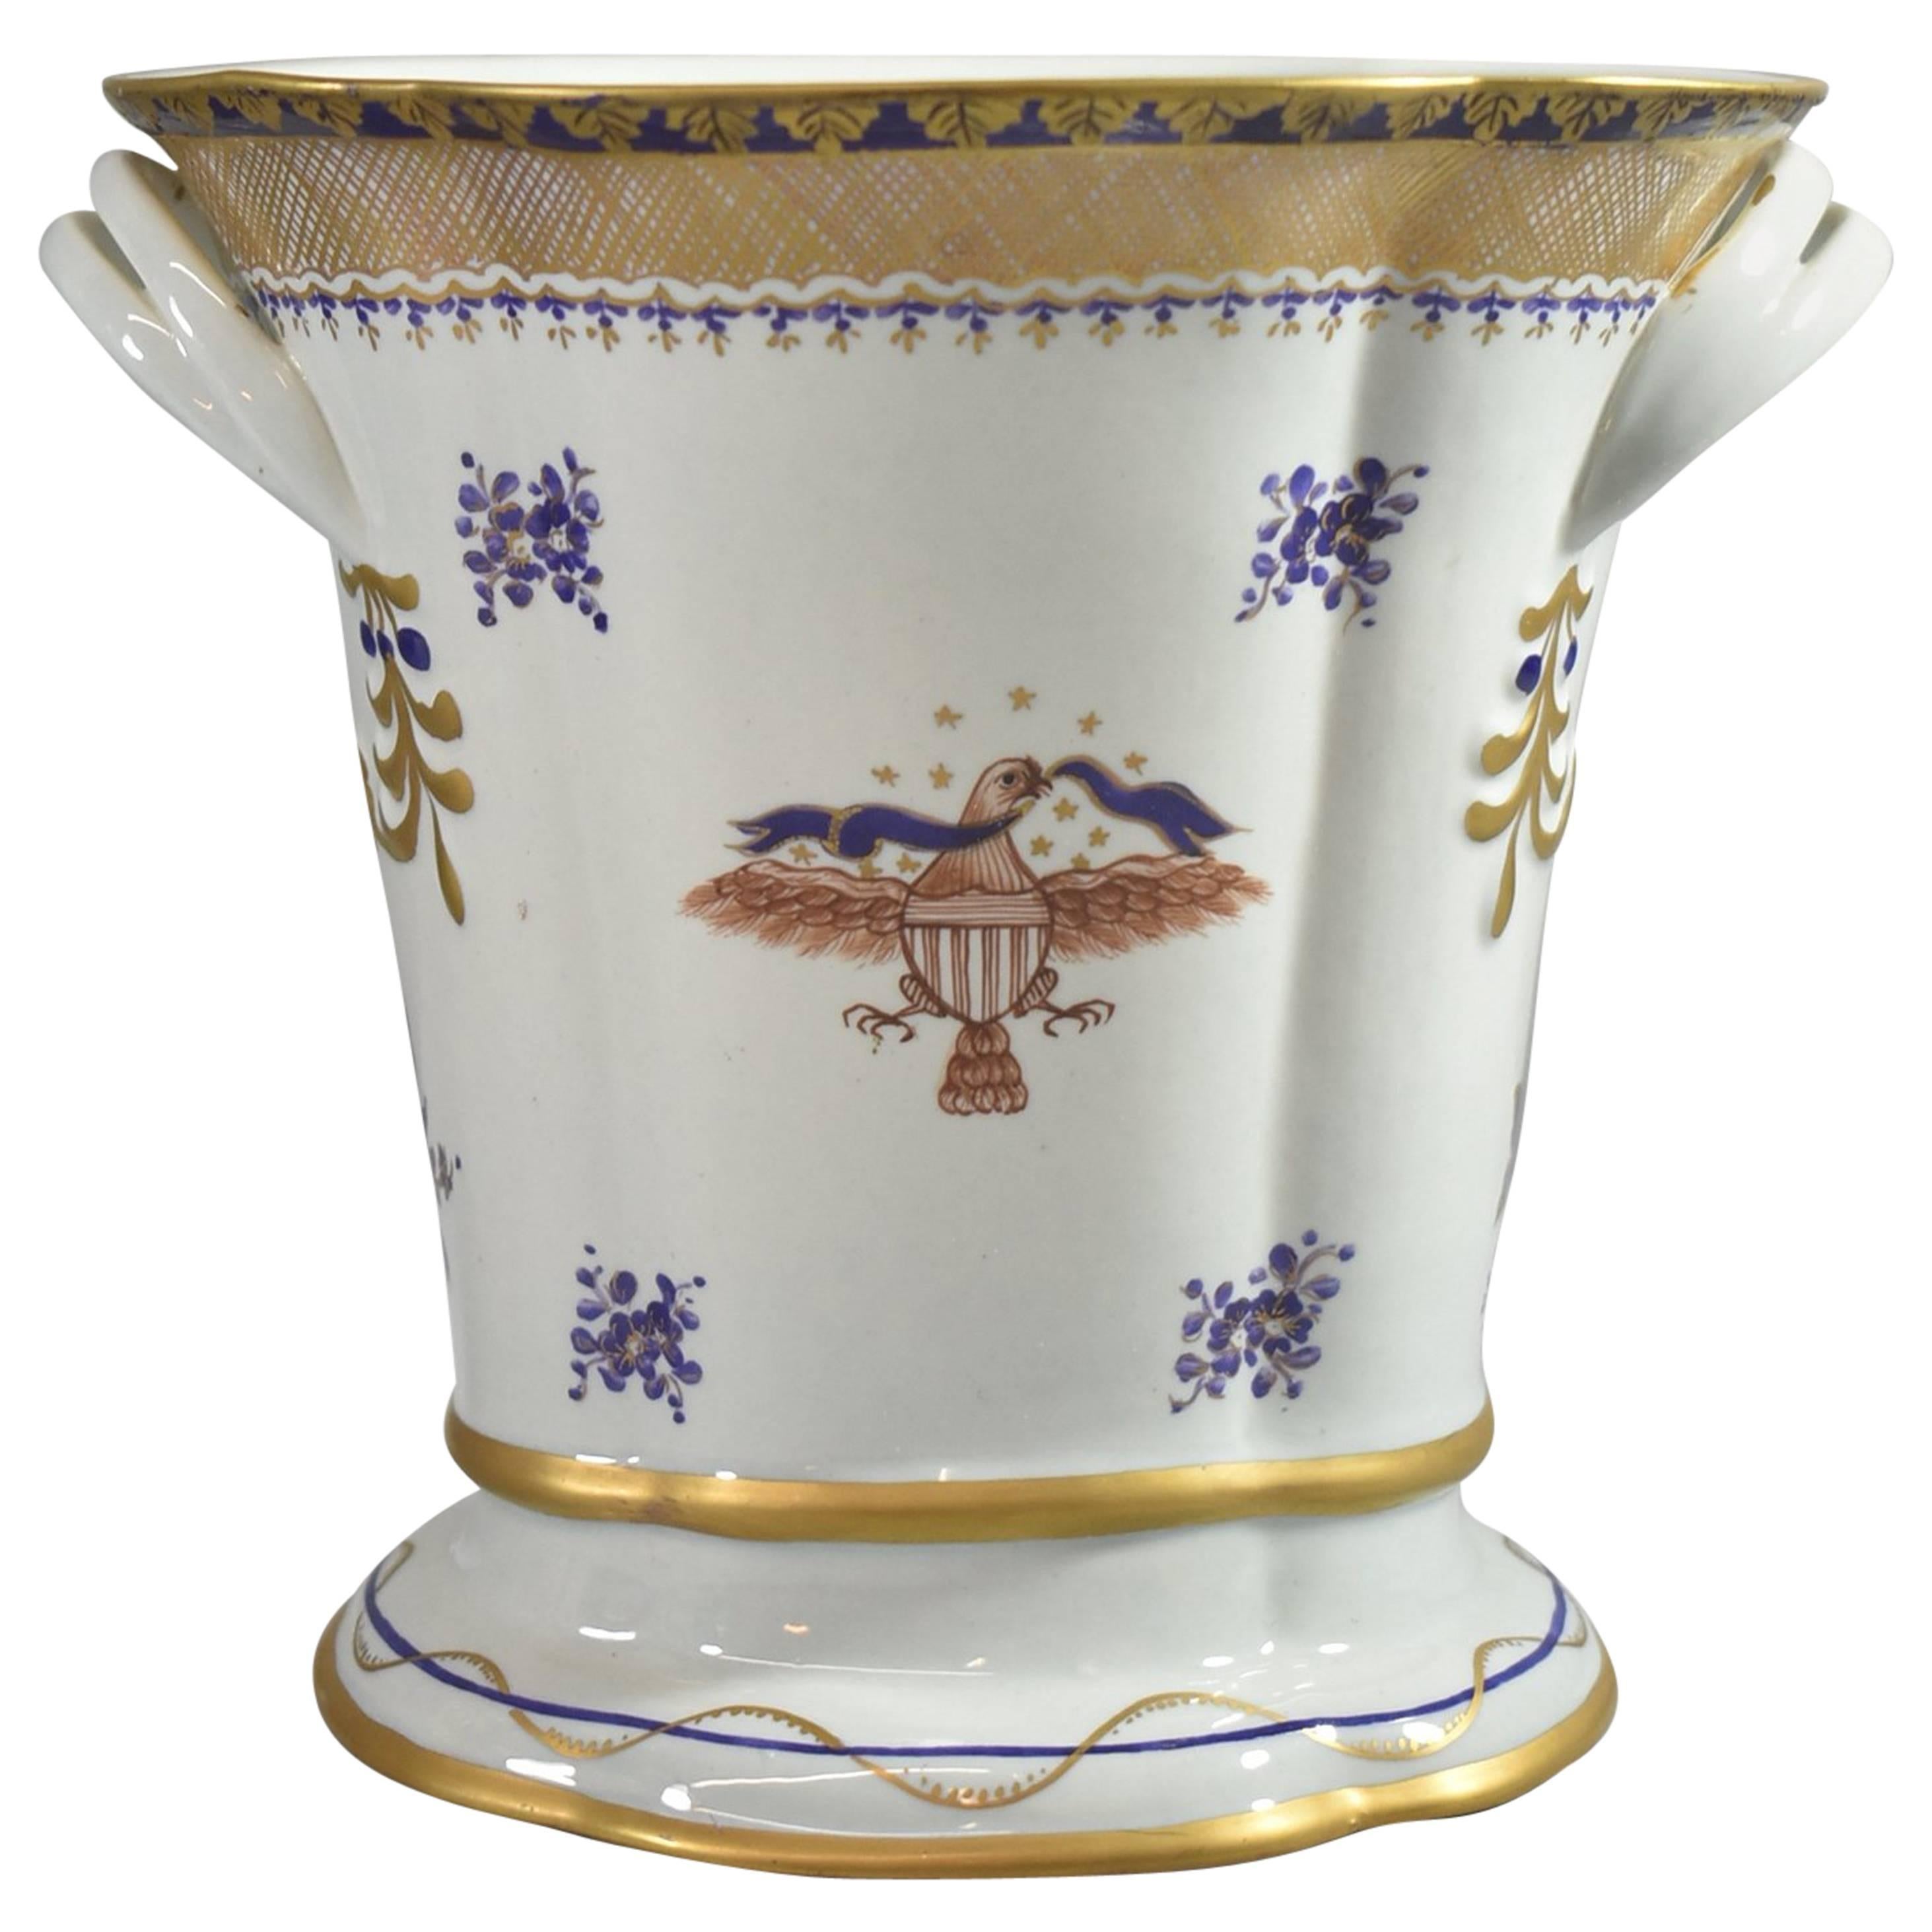 Lowestoft Reproduction Created by Mottahedeh Federal Eagle Porcelain Cachepot